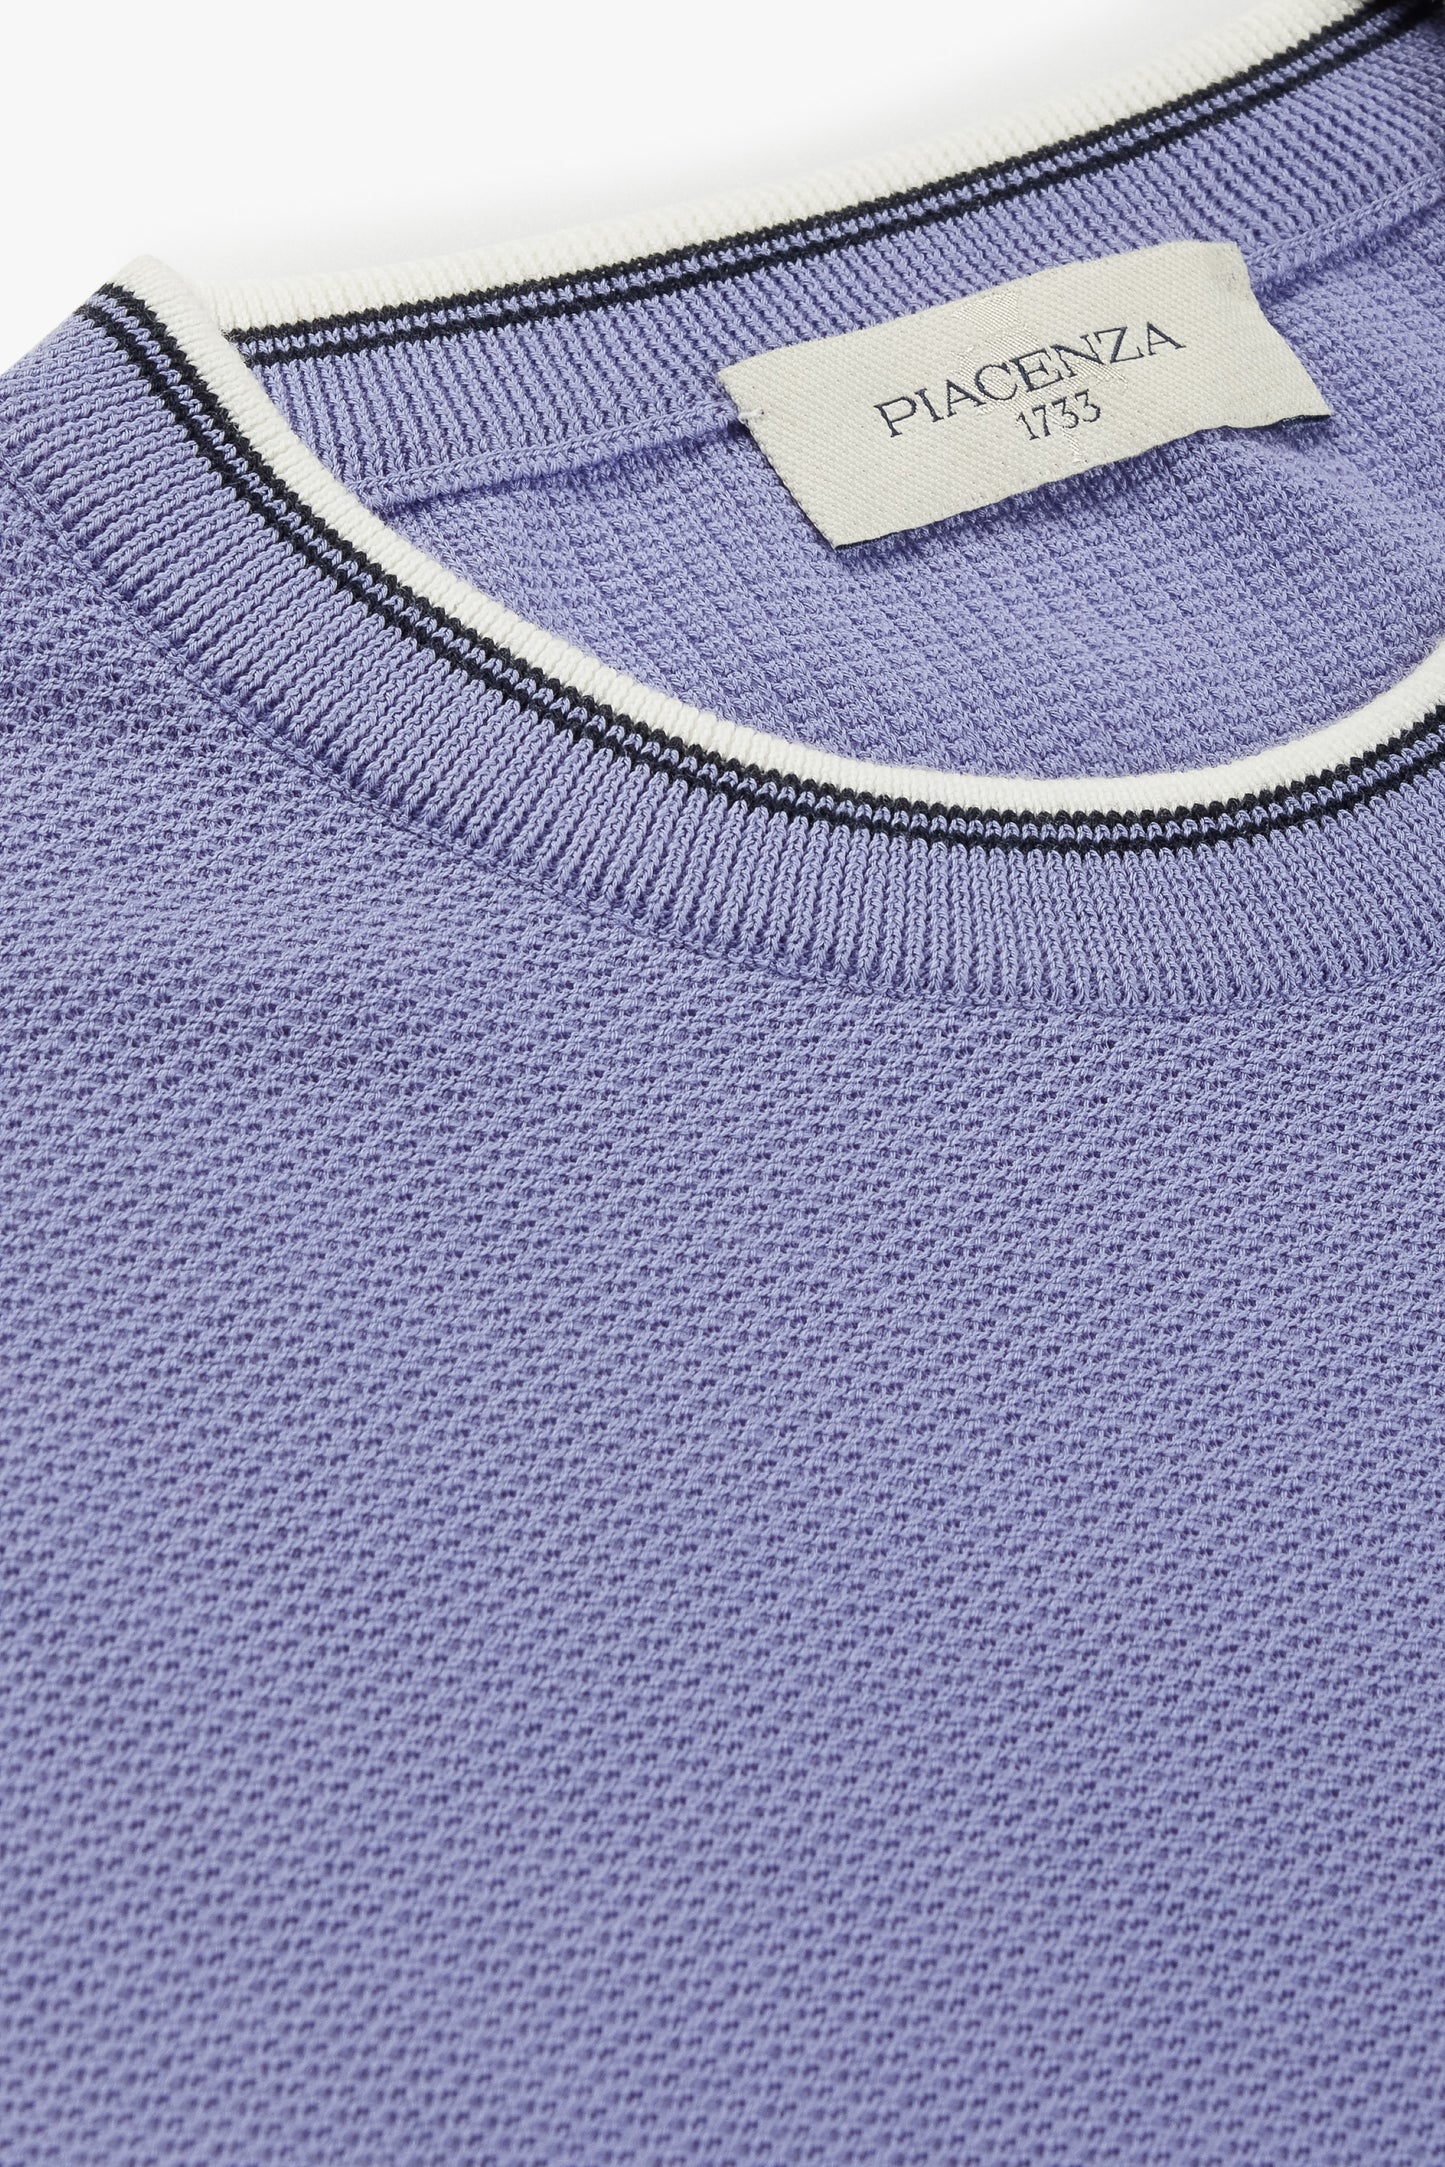 Lilac shell stitch short sleeve shirt with white edge